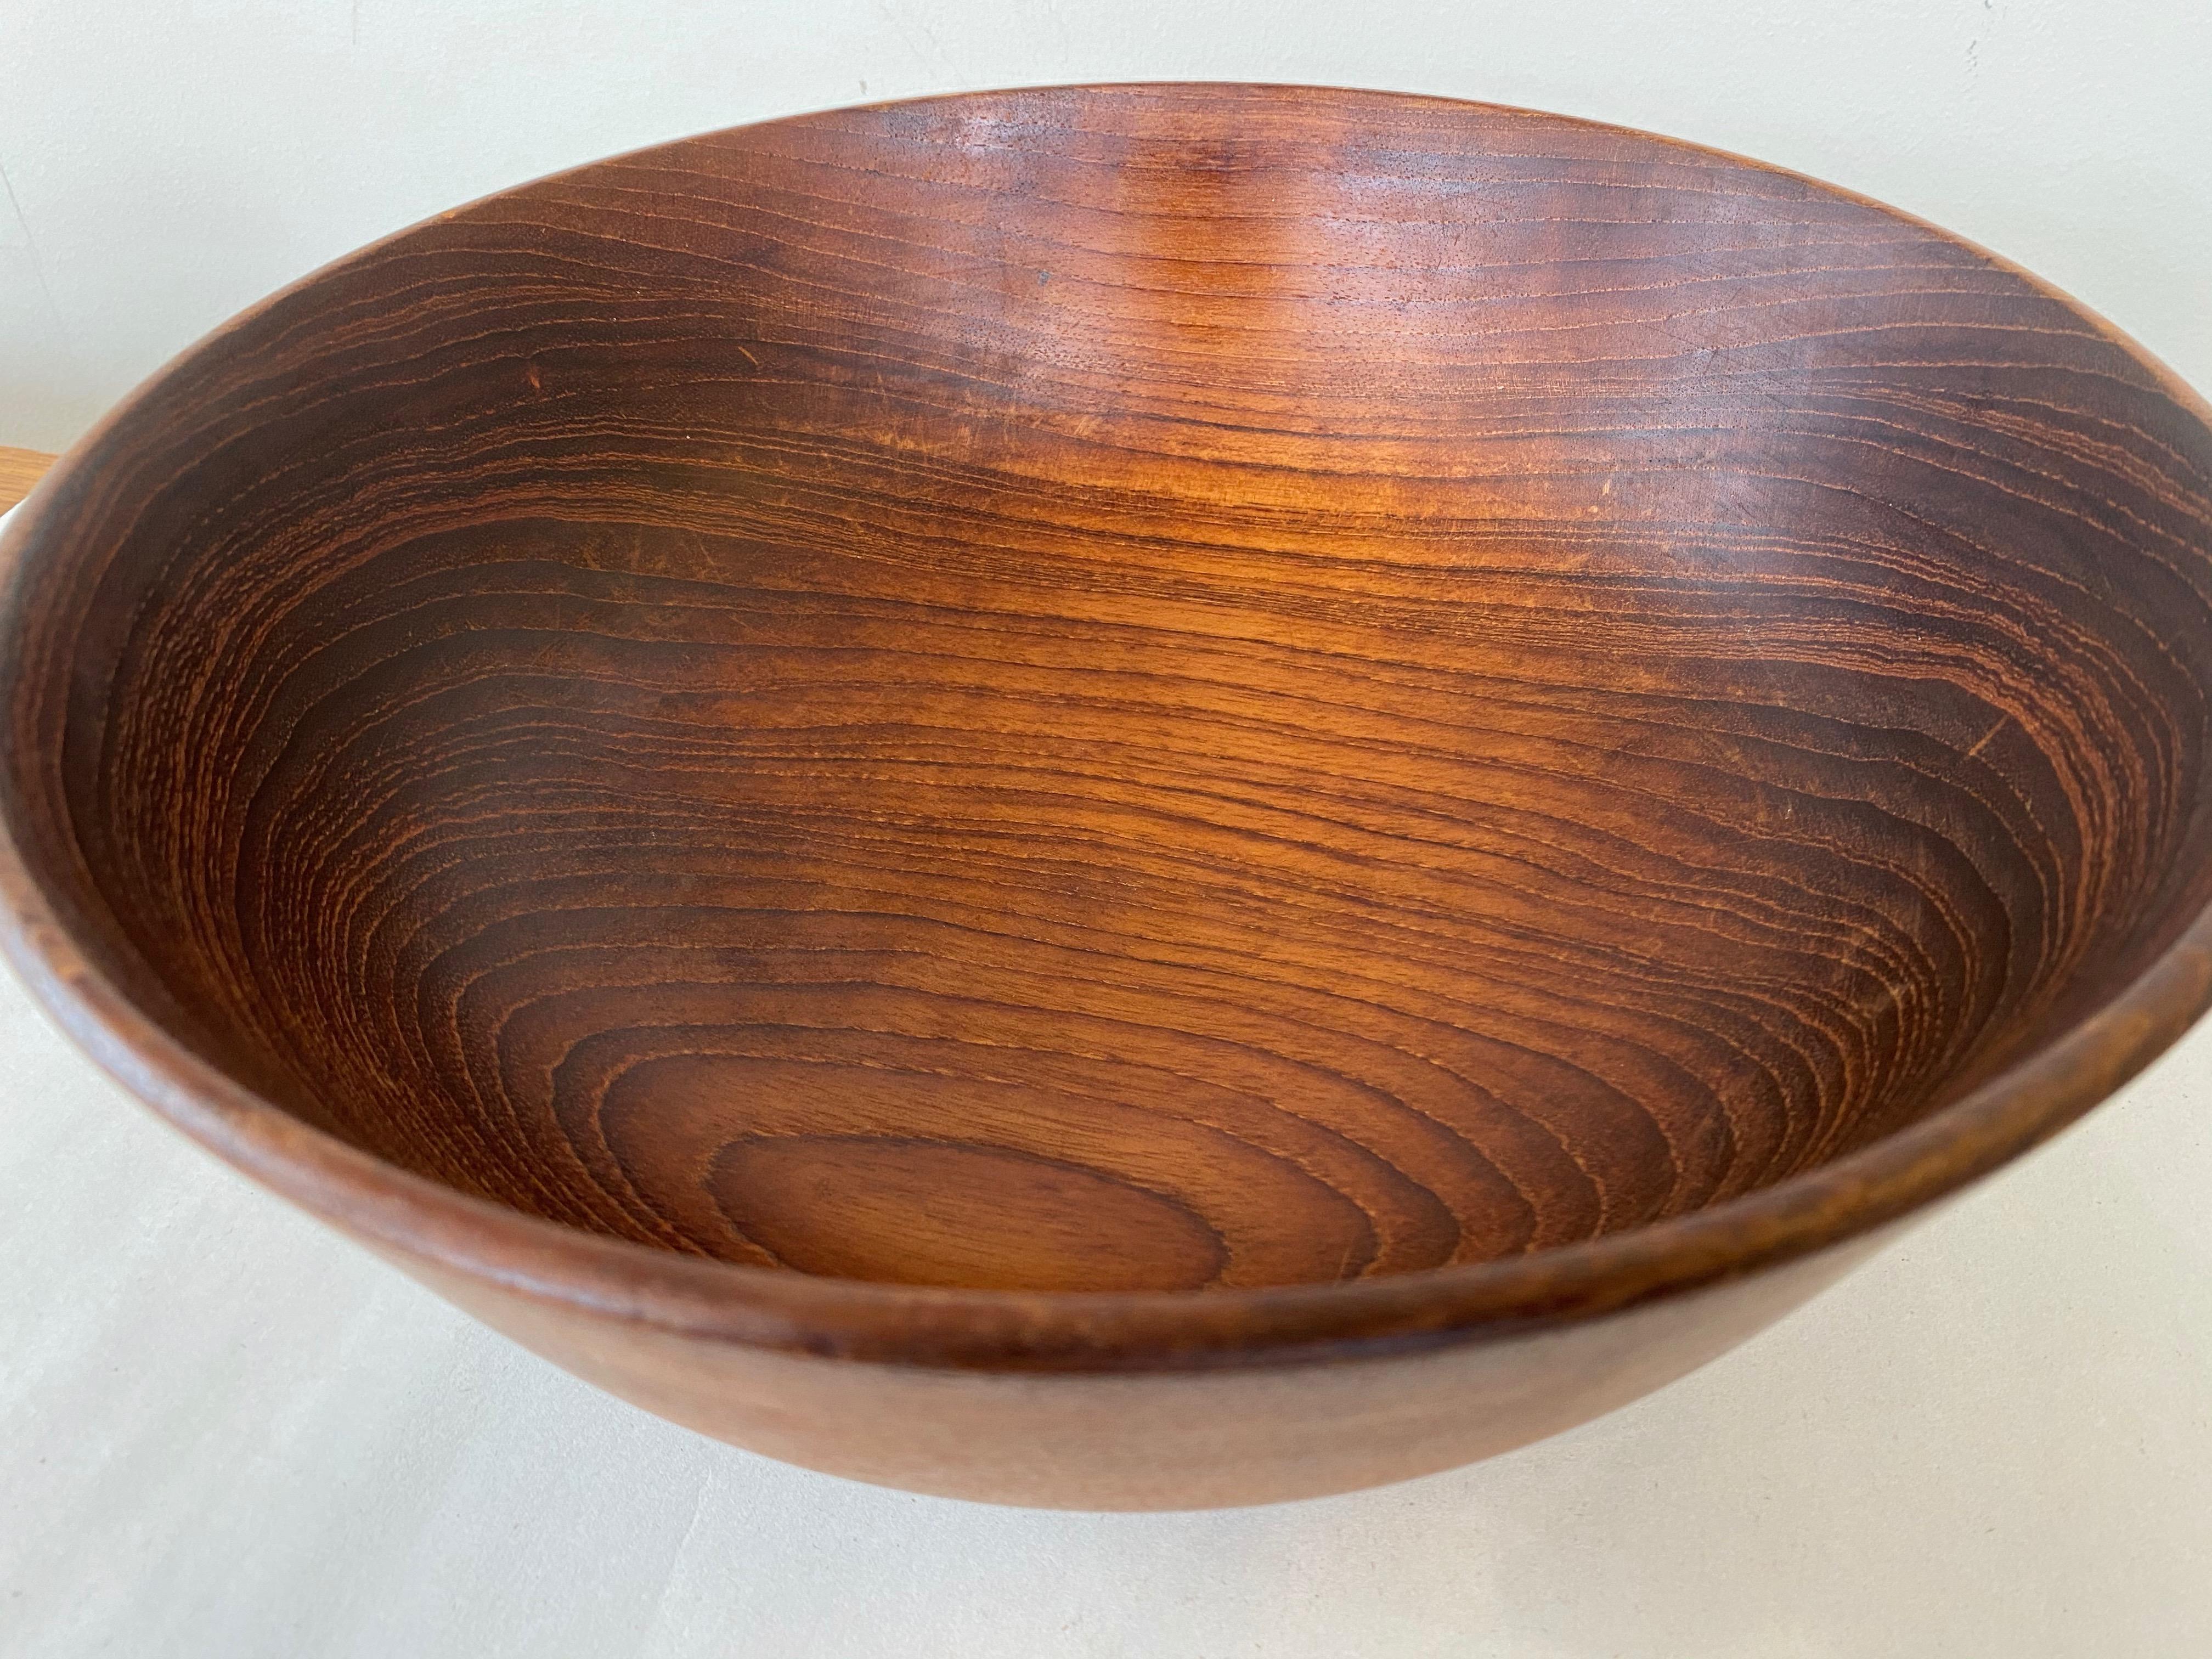 Bob Stocksdale Teak Turned Wood Bowl with Exceptional Grain Pattern, Early 1970s For Sale 6